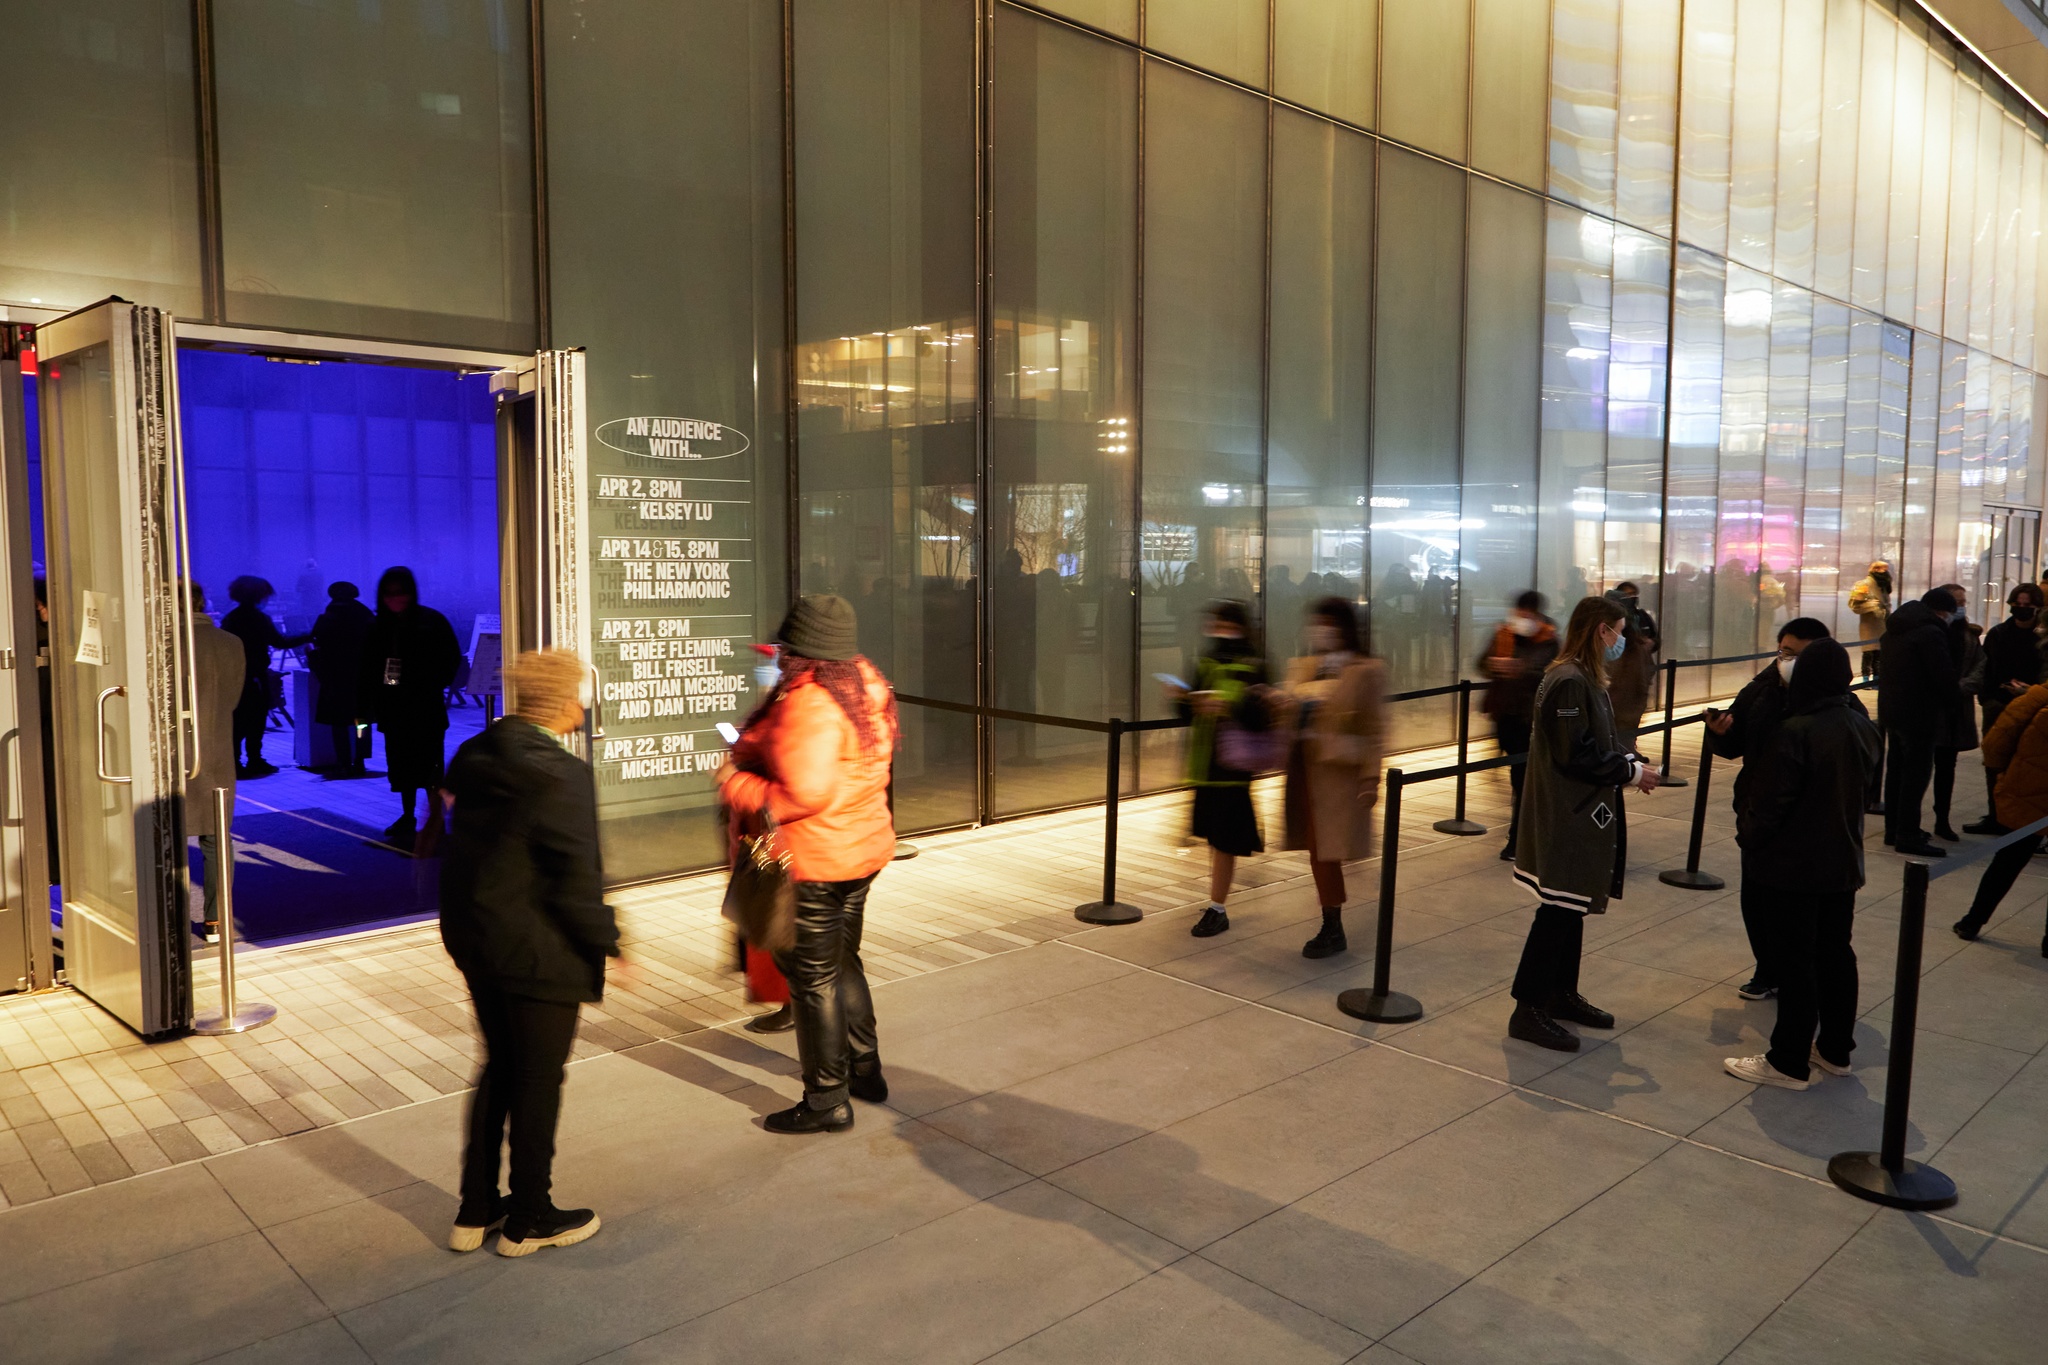 People in a stanchioned line outside The Shed at night. An open door reveals a blue-lit performance space inside.